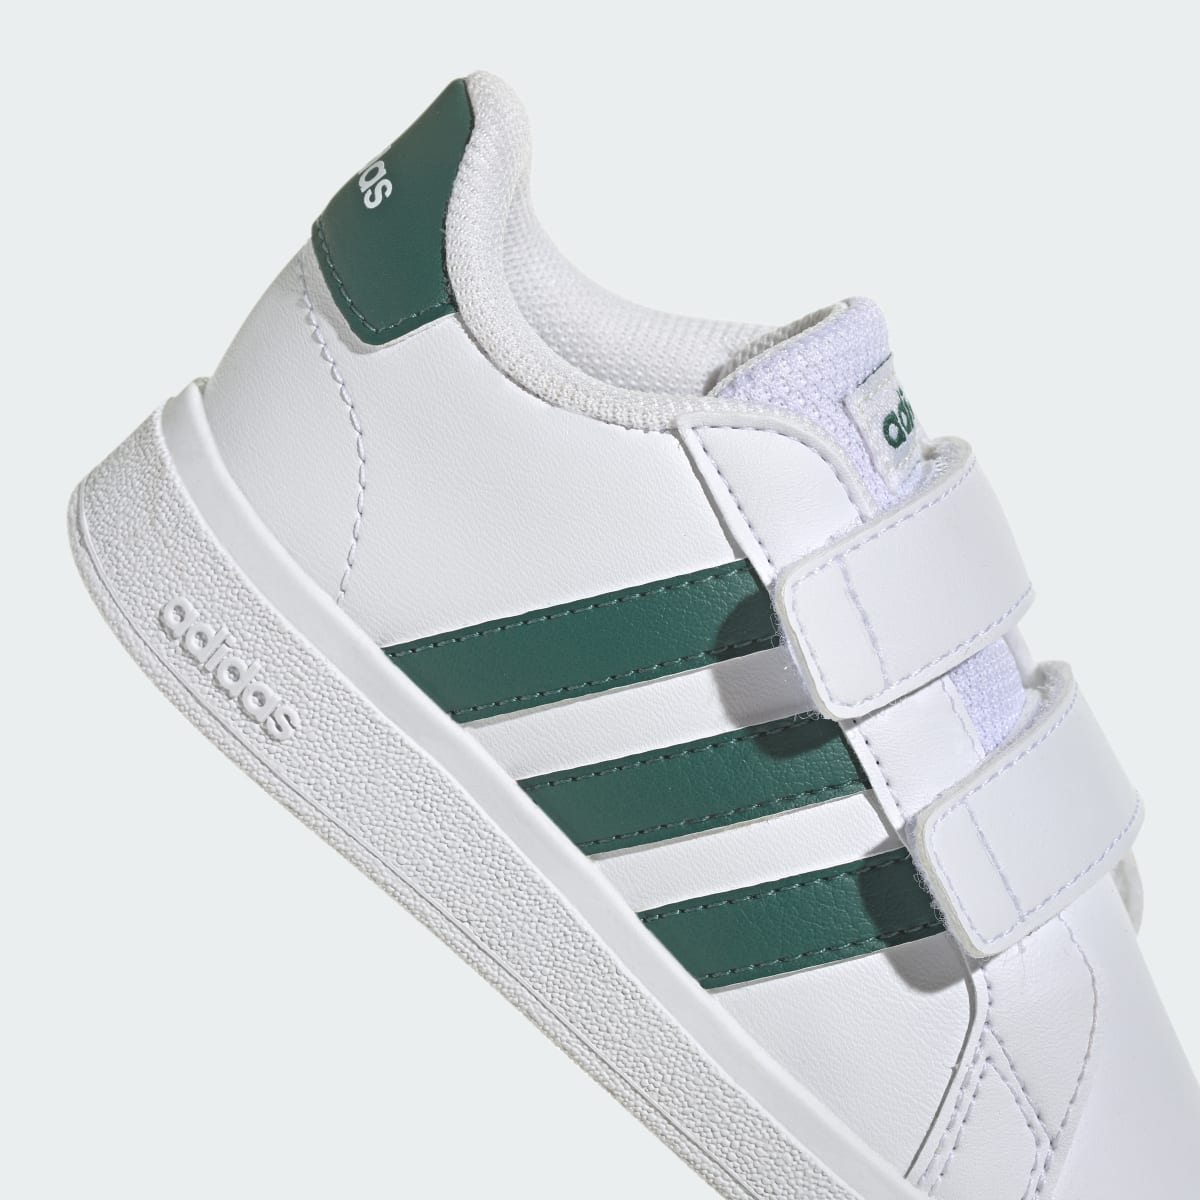 Adidas Grand Court Lifestyle Hook and Loop Schuh. 10